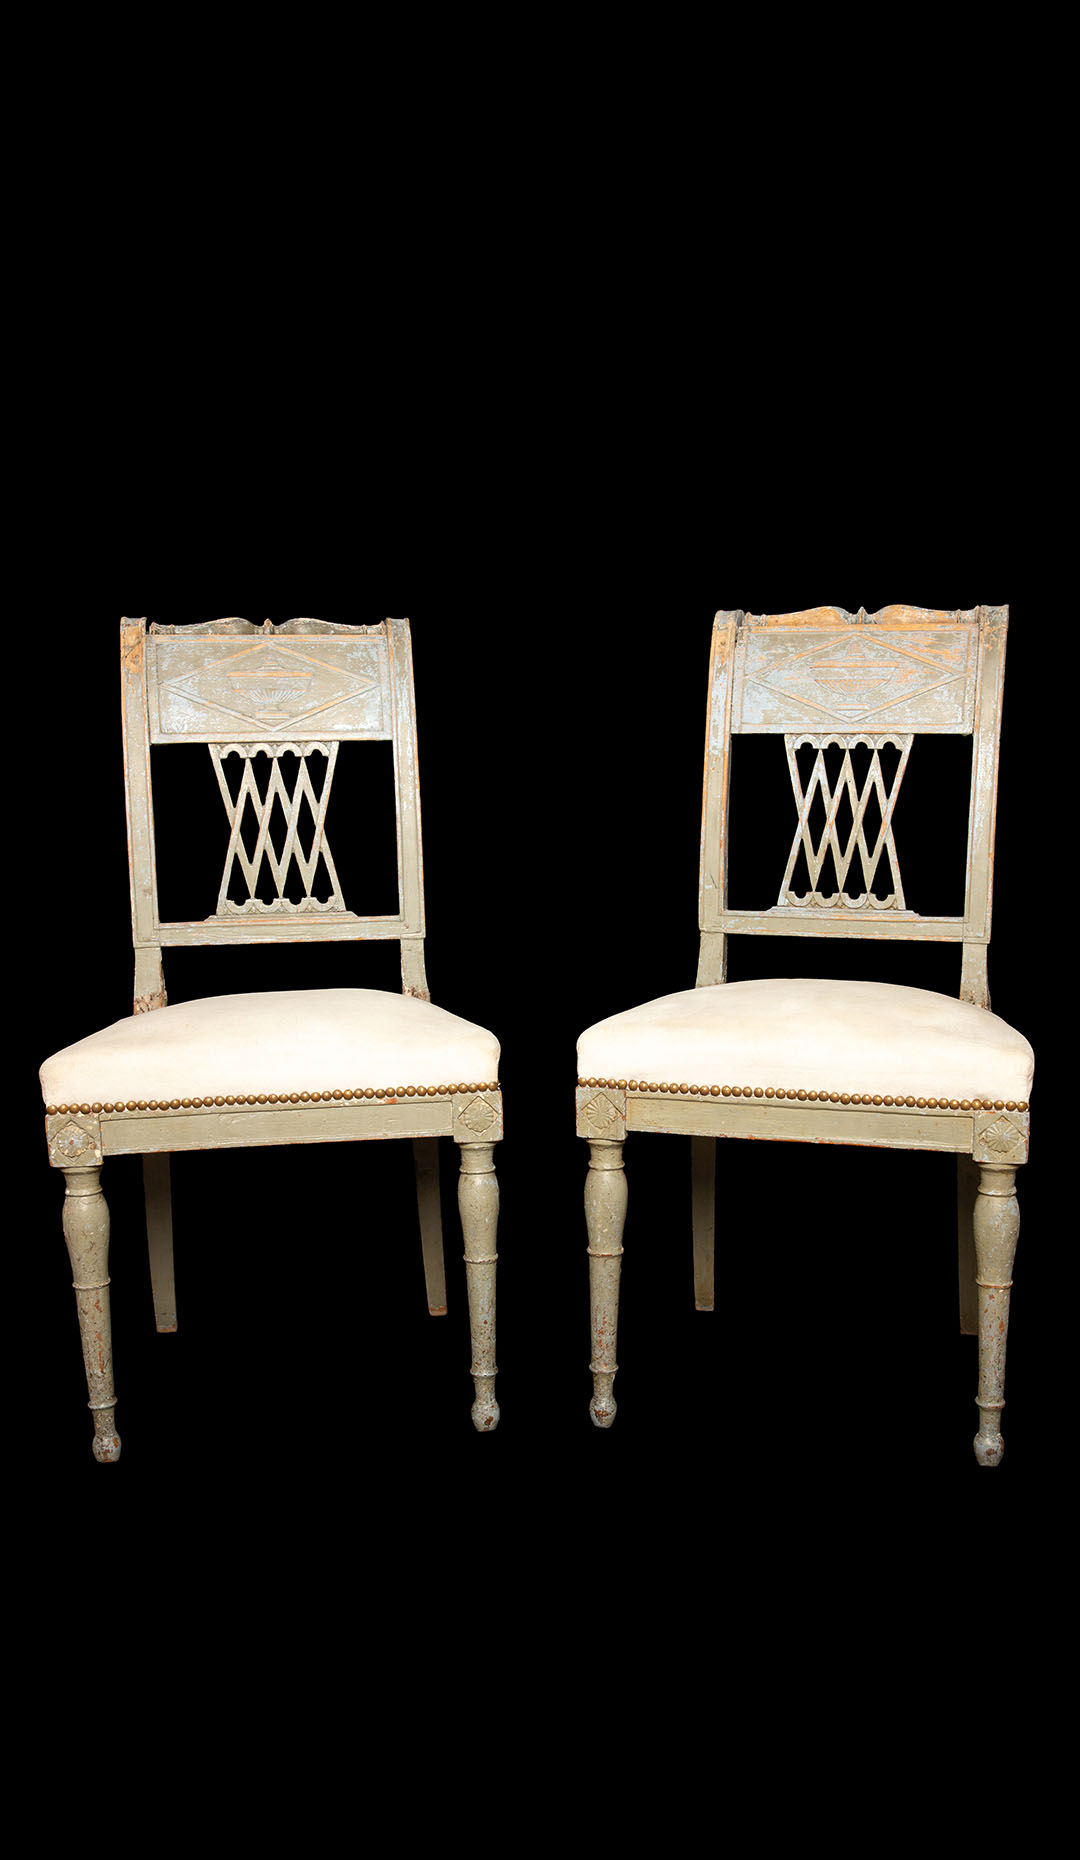 Pair of Directoire Period Grey Chairs with White Velvet Seats